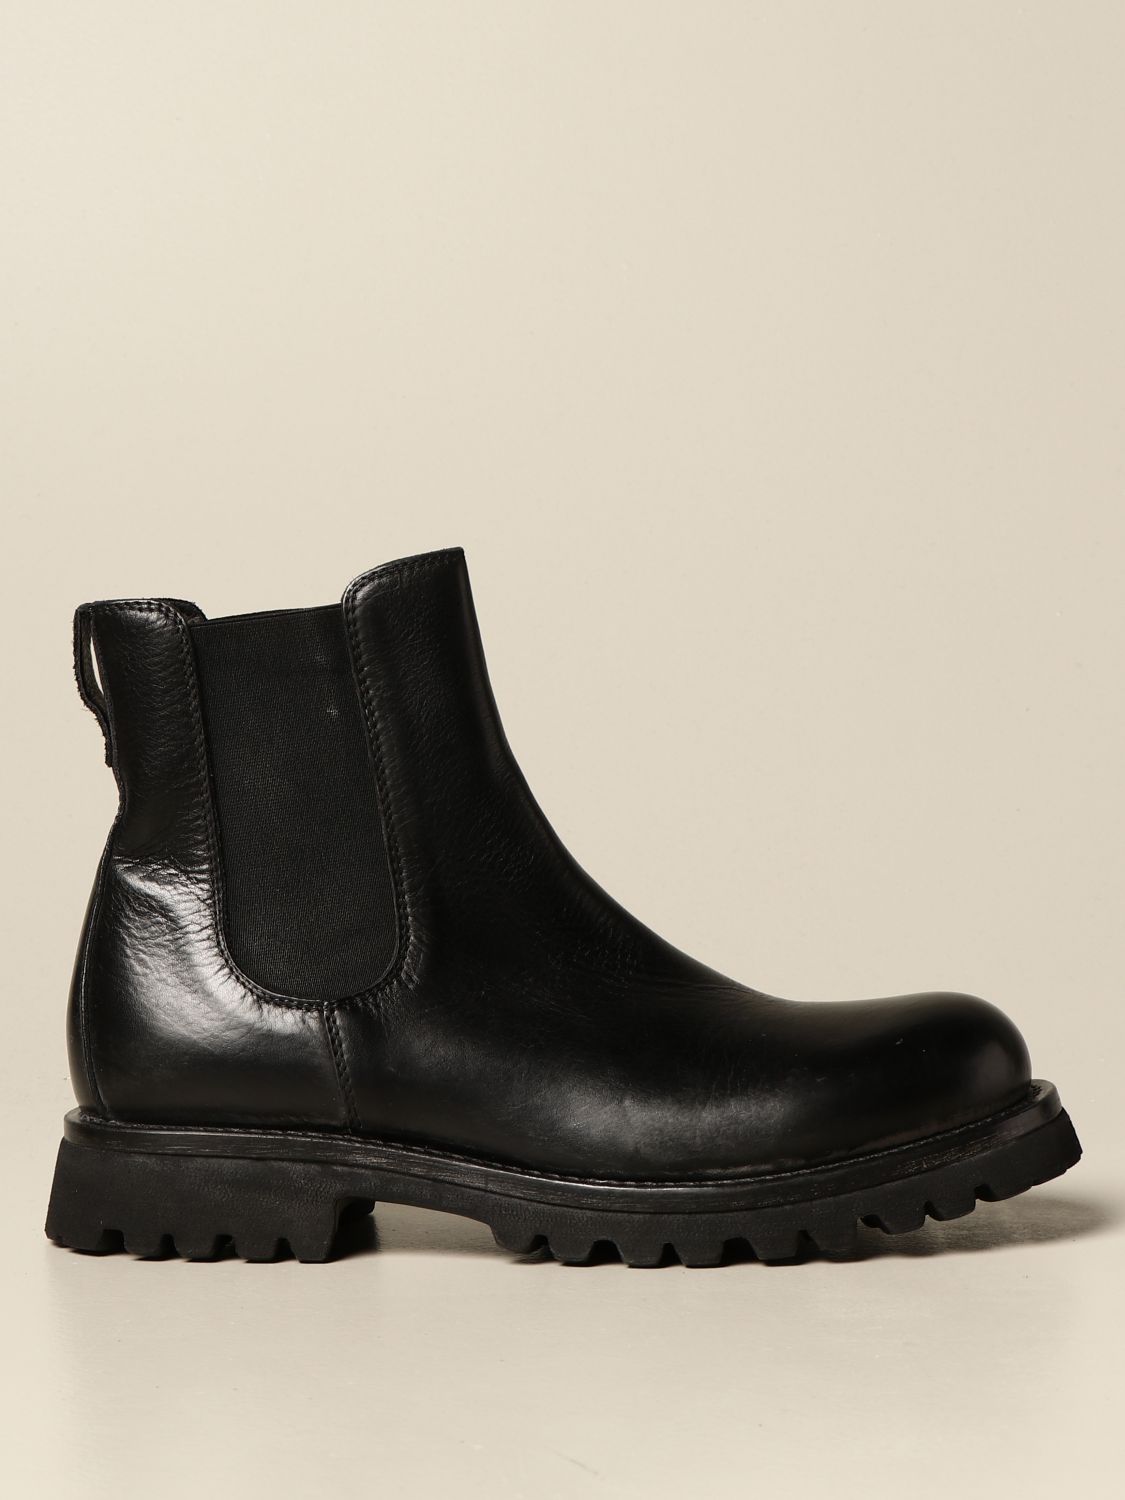 Correspondent Doctor in de filosofie Straat Moma Outlet: boots for man - Black | Moma boots 2CW122 online on GIGLIO.COM